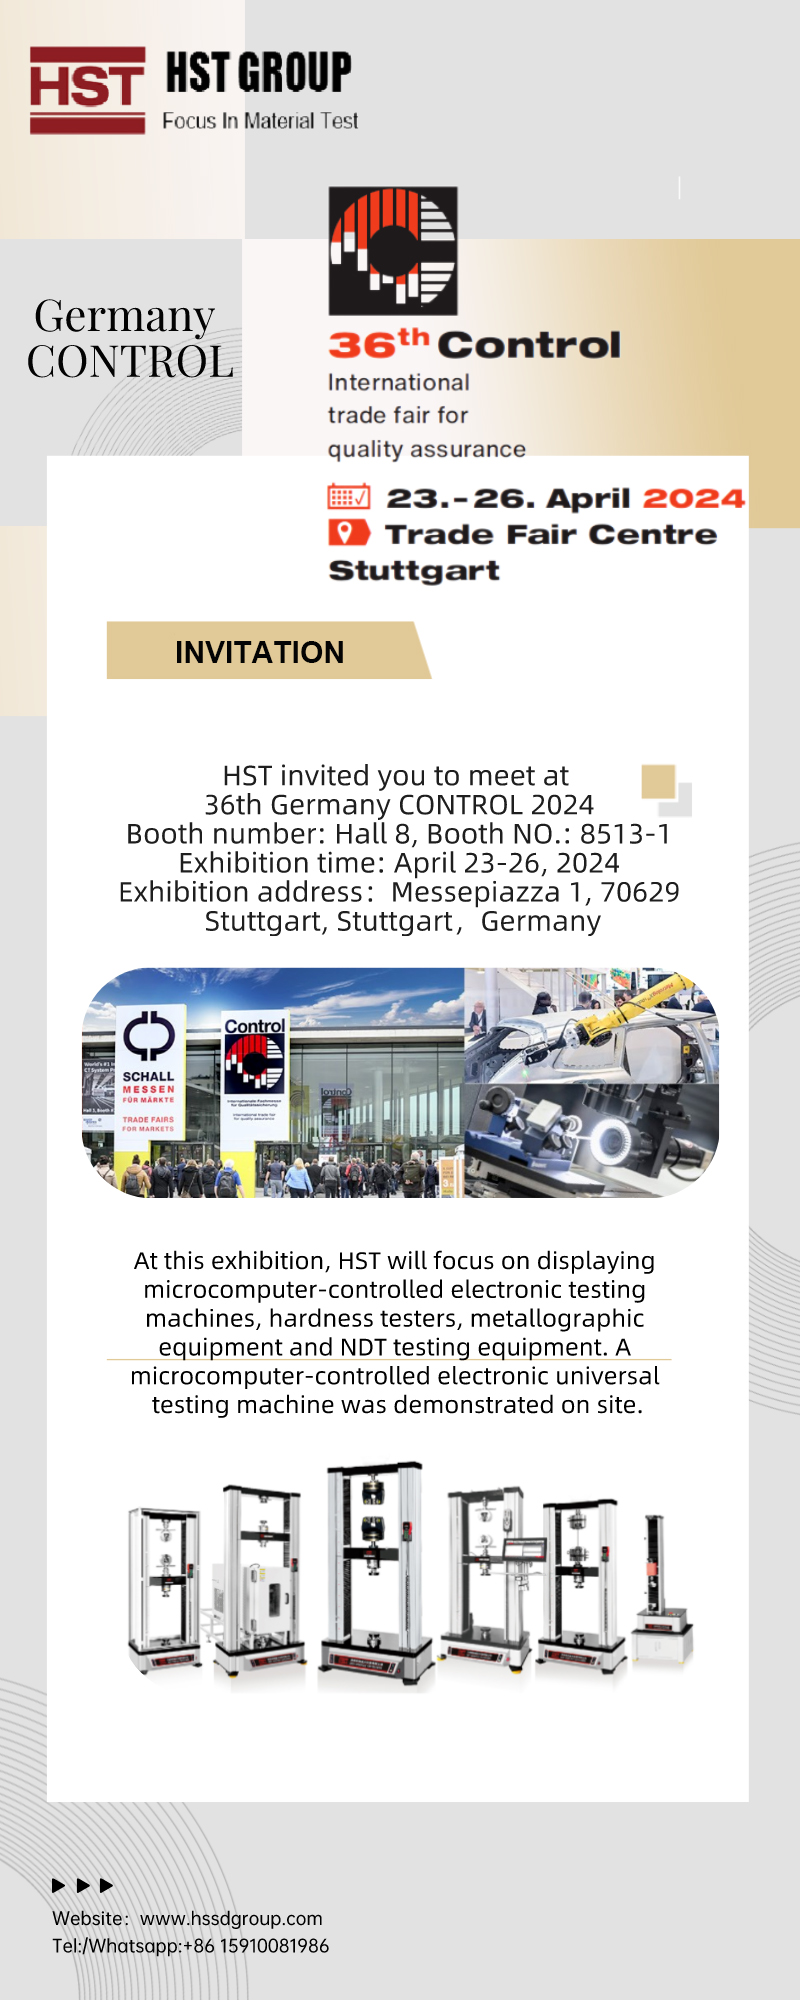 HST Group invites you to meet at 36th Germany CONTROL 2024